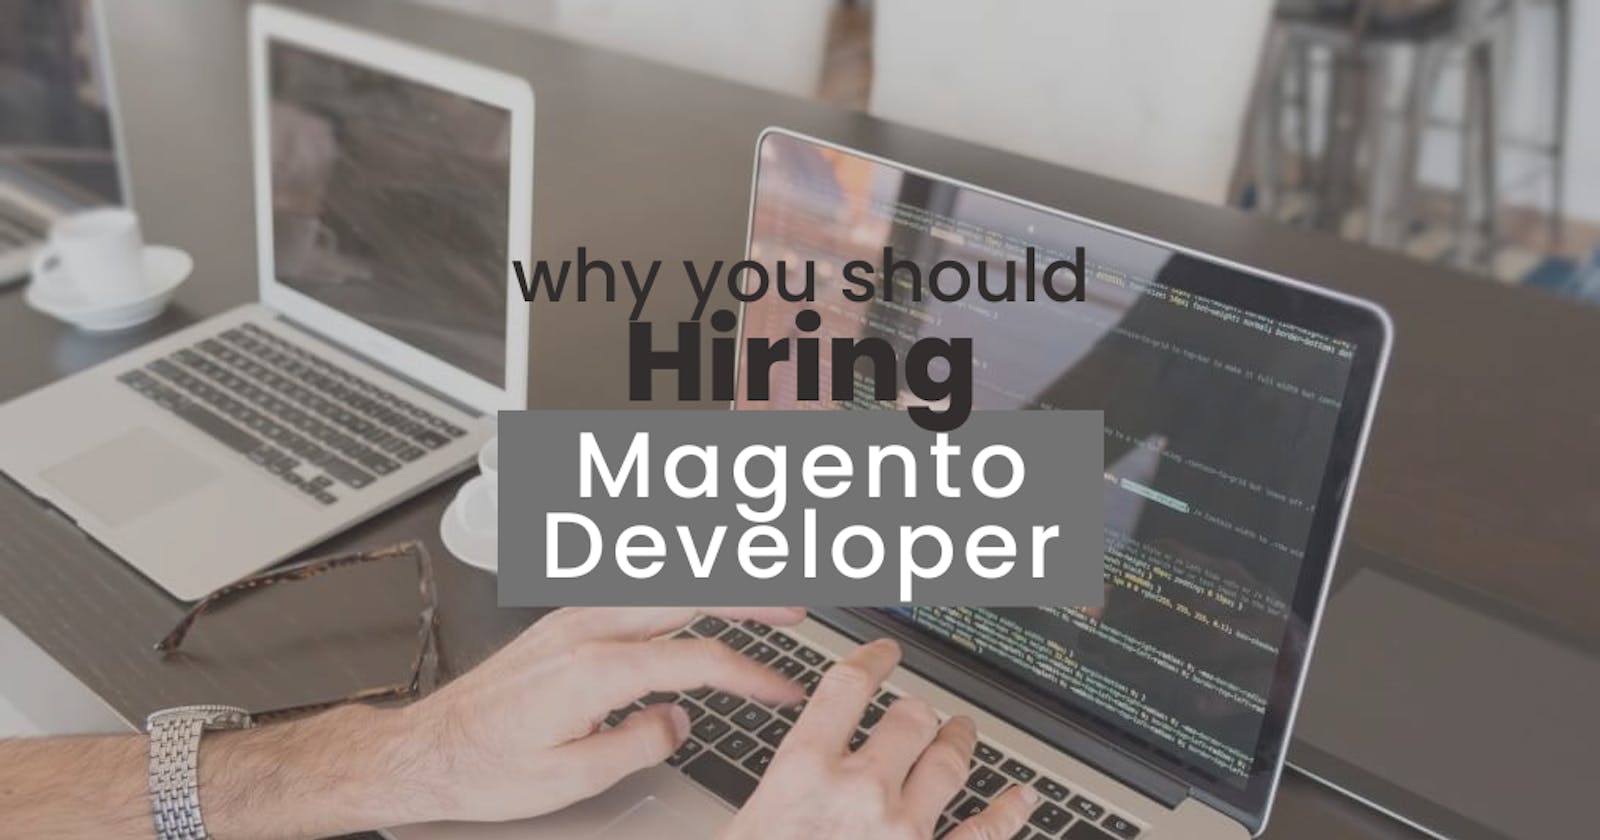 Why should you hire dedicated Magento developers?